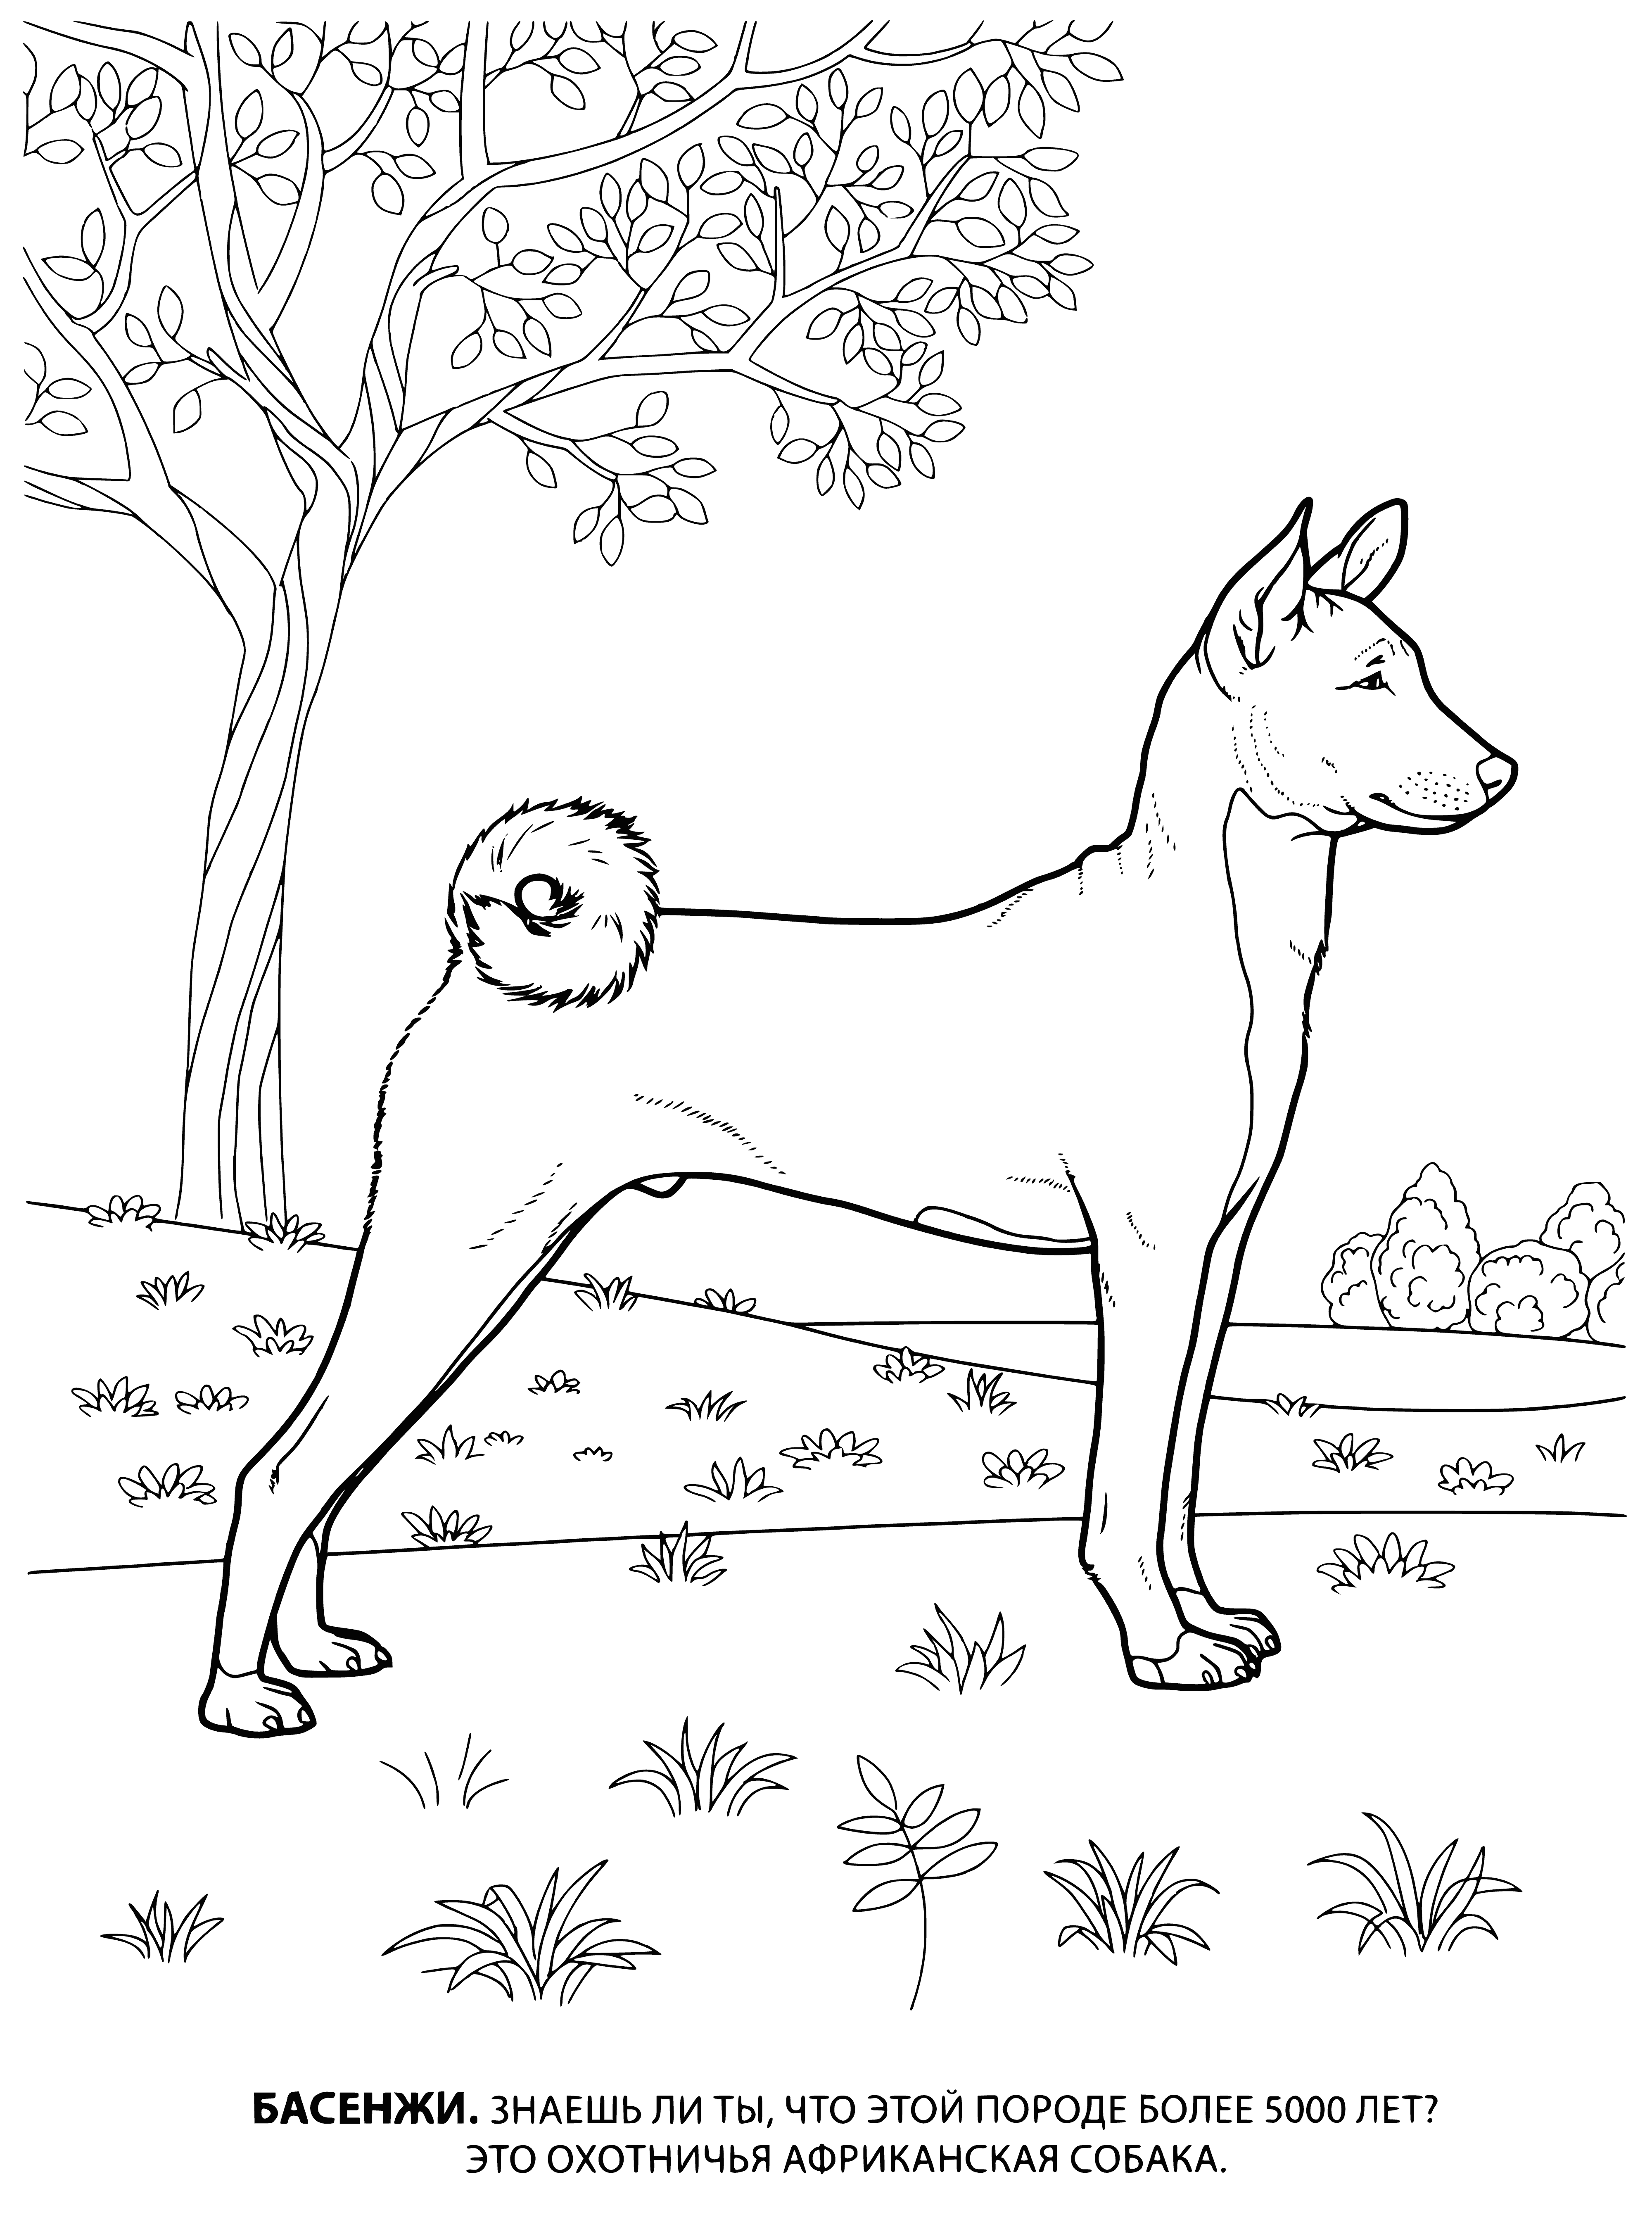 coloring page: 3 dogs wait around a basin - small white with black spots, brown & white beagle & a black Labrador Retriever.